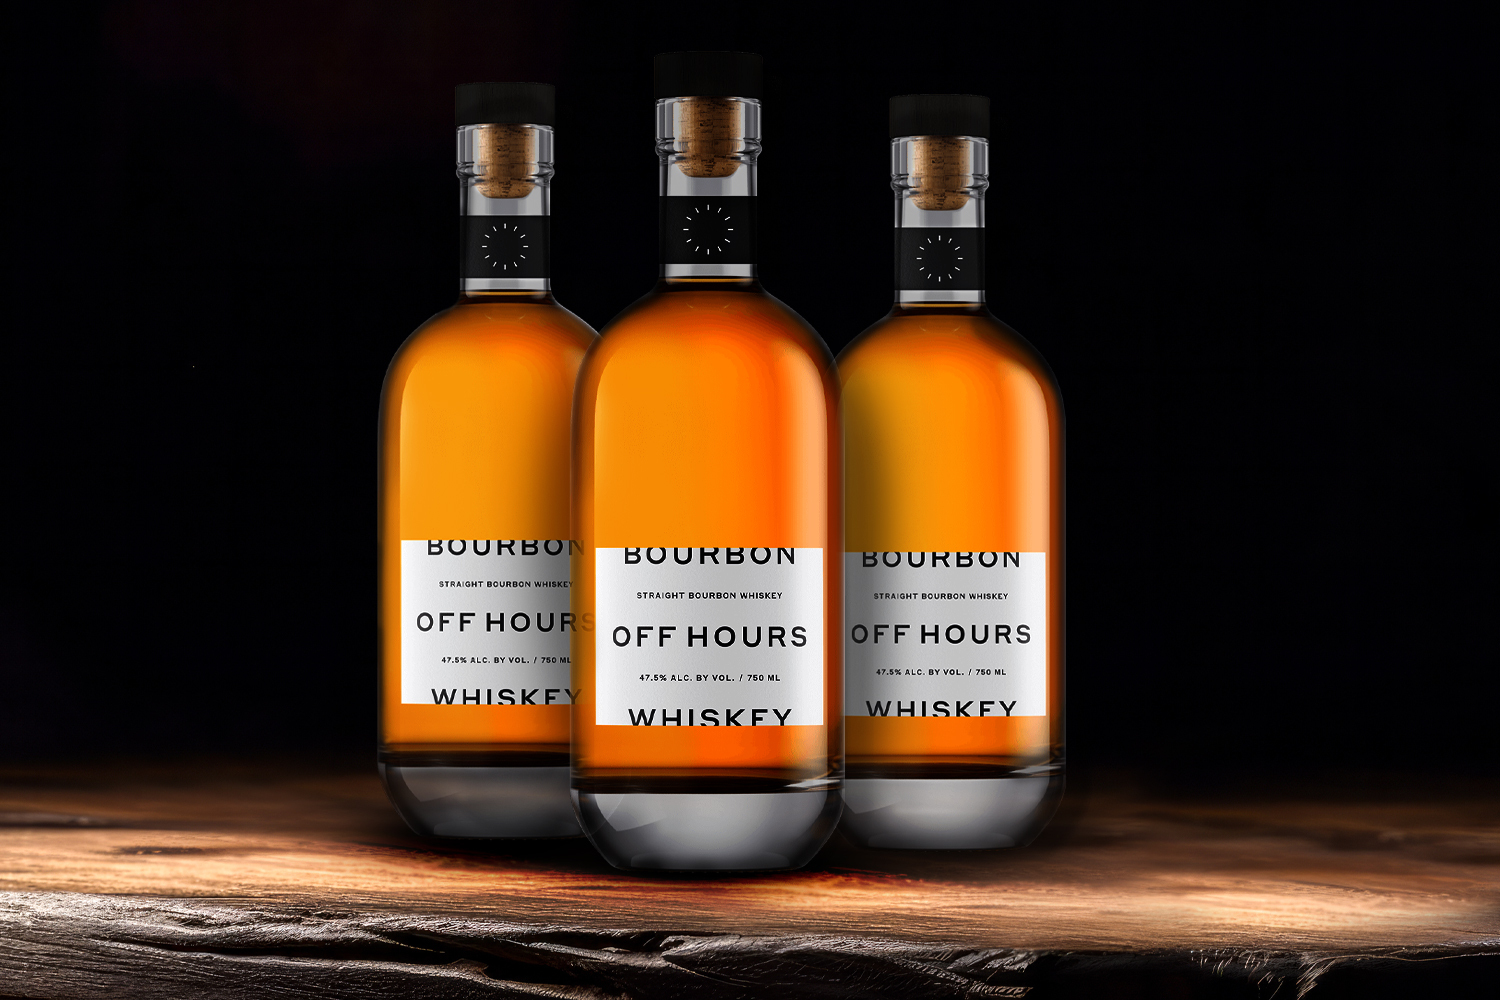 3 bottles of off hours bourbon on a wooden table